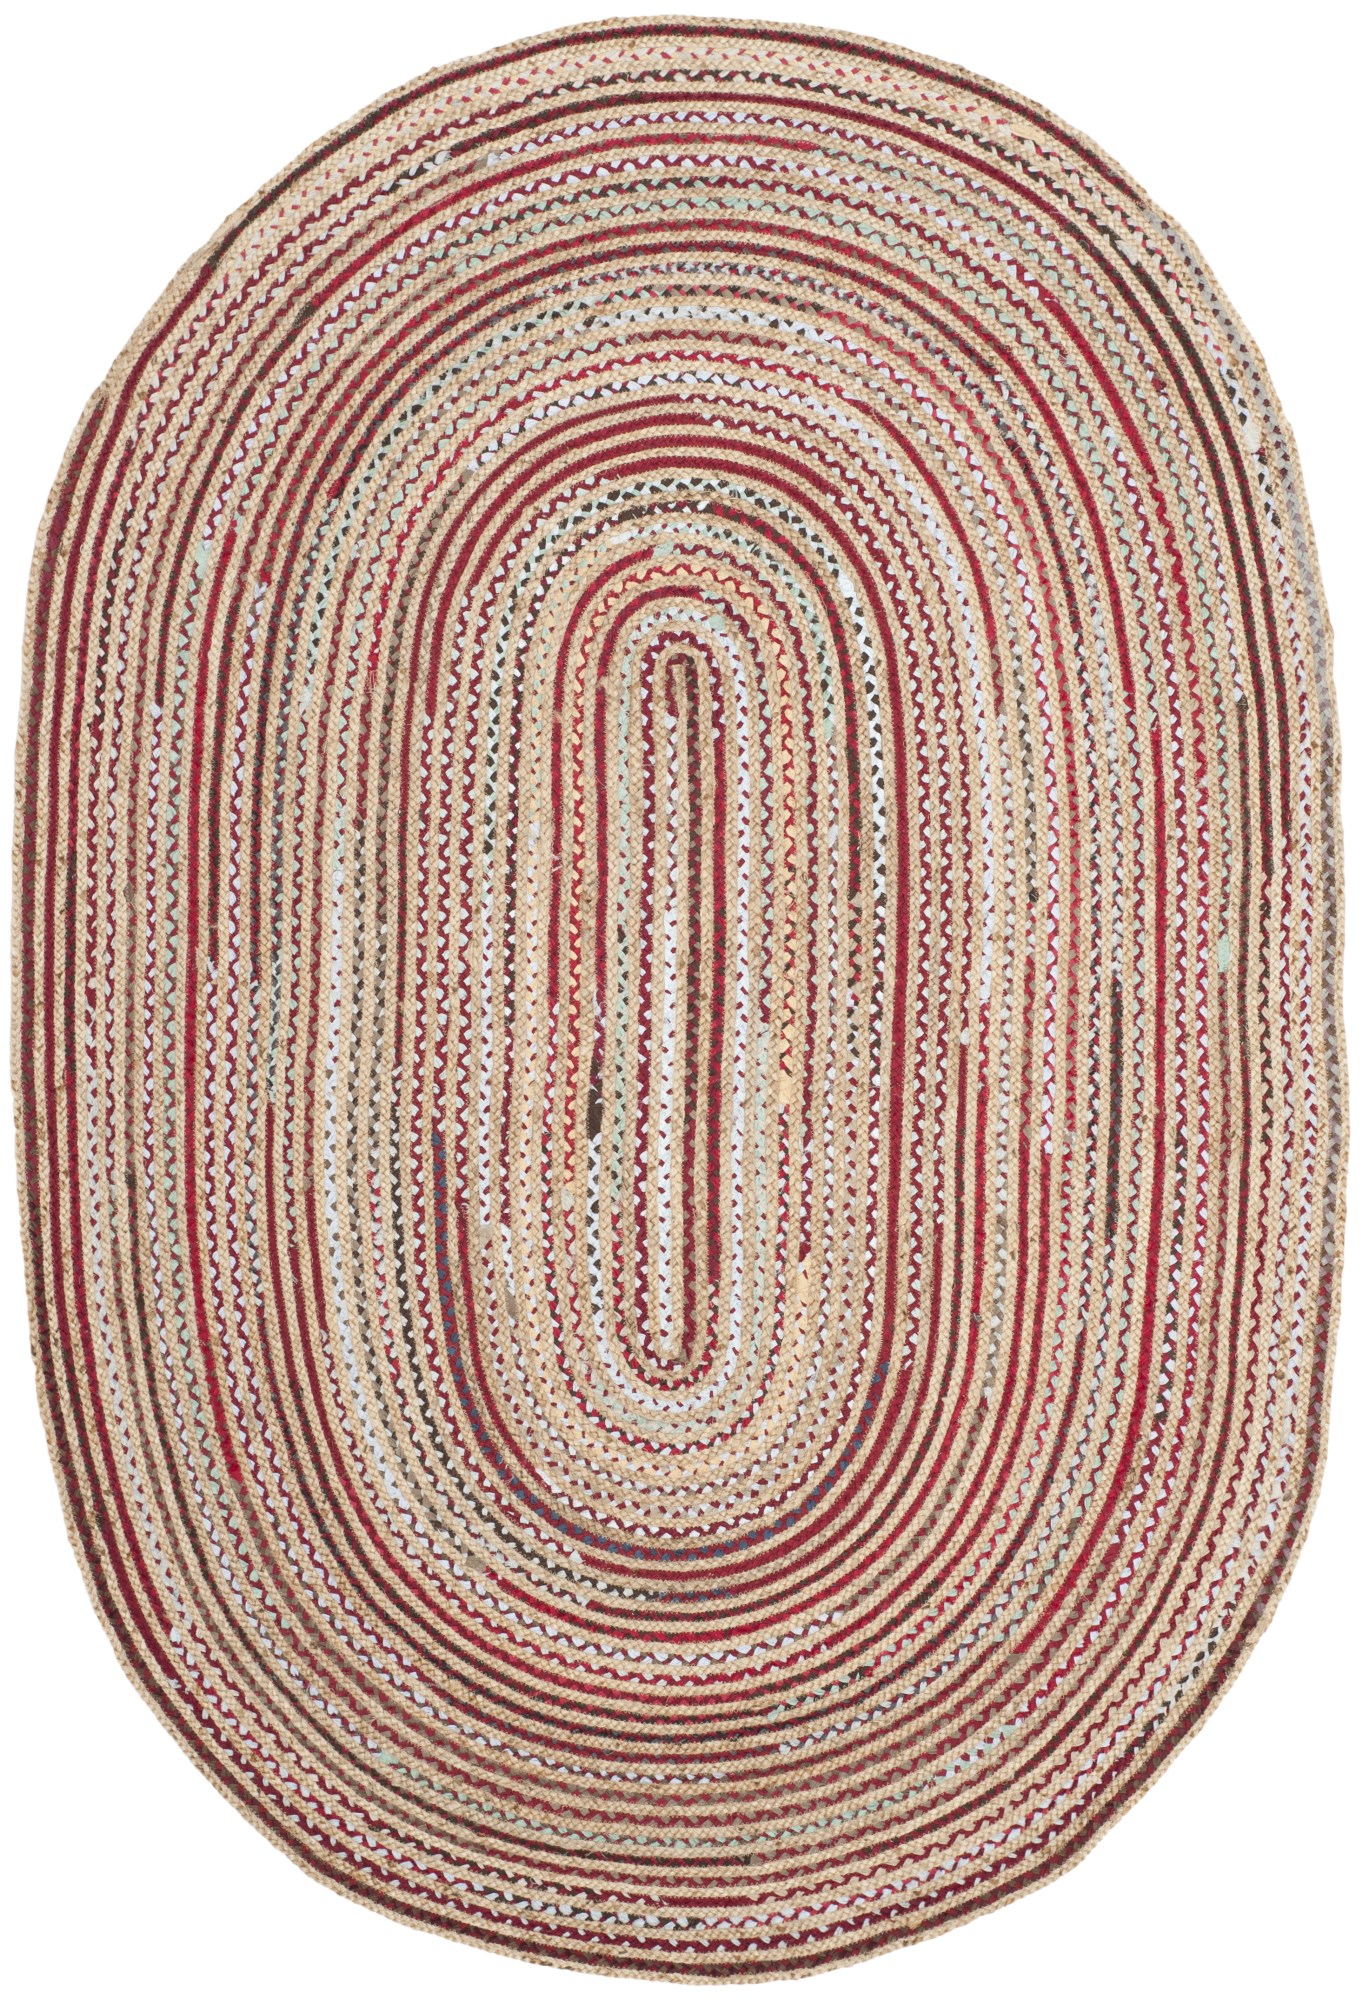 Oval Jute Rugs: Tie Your Space Together